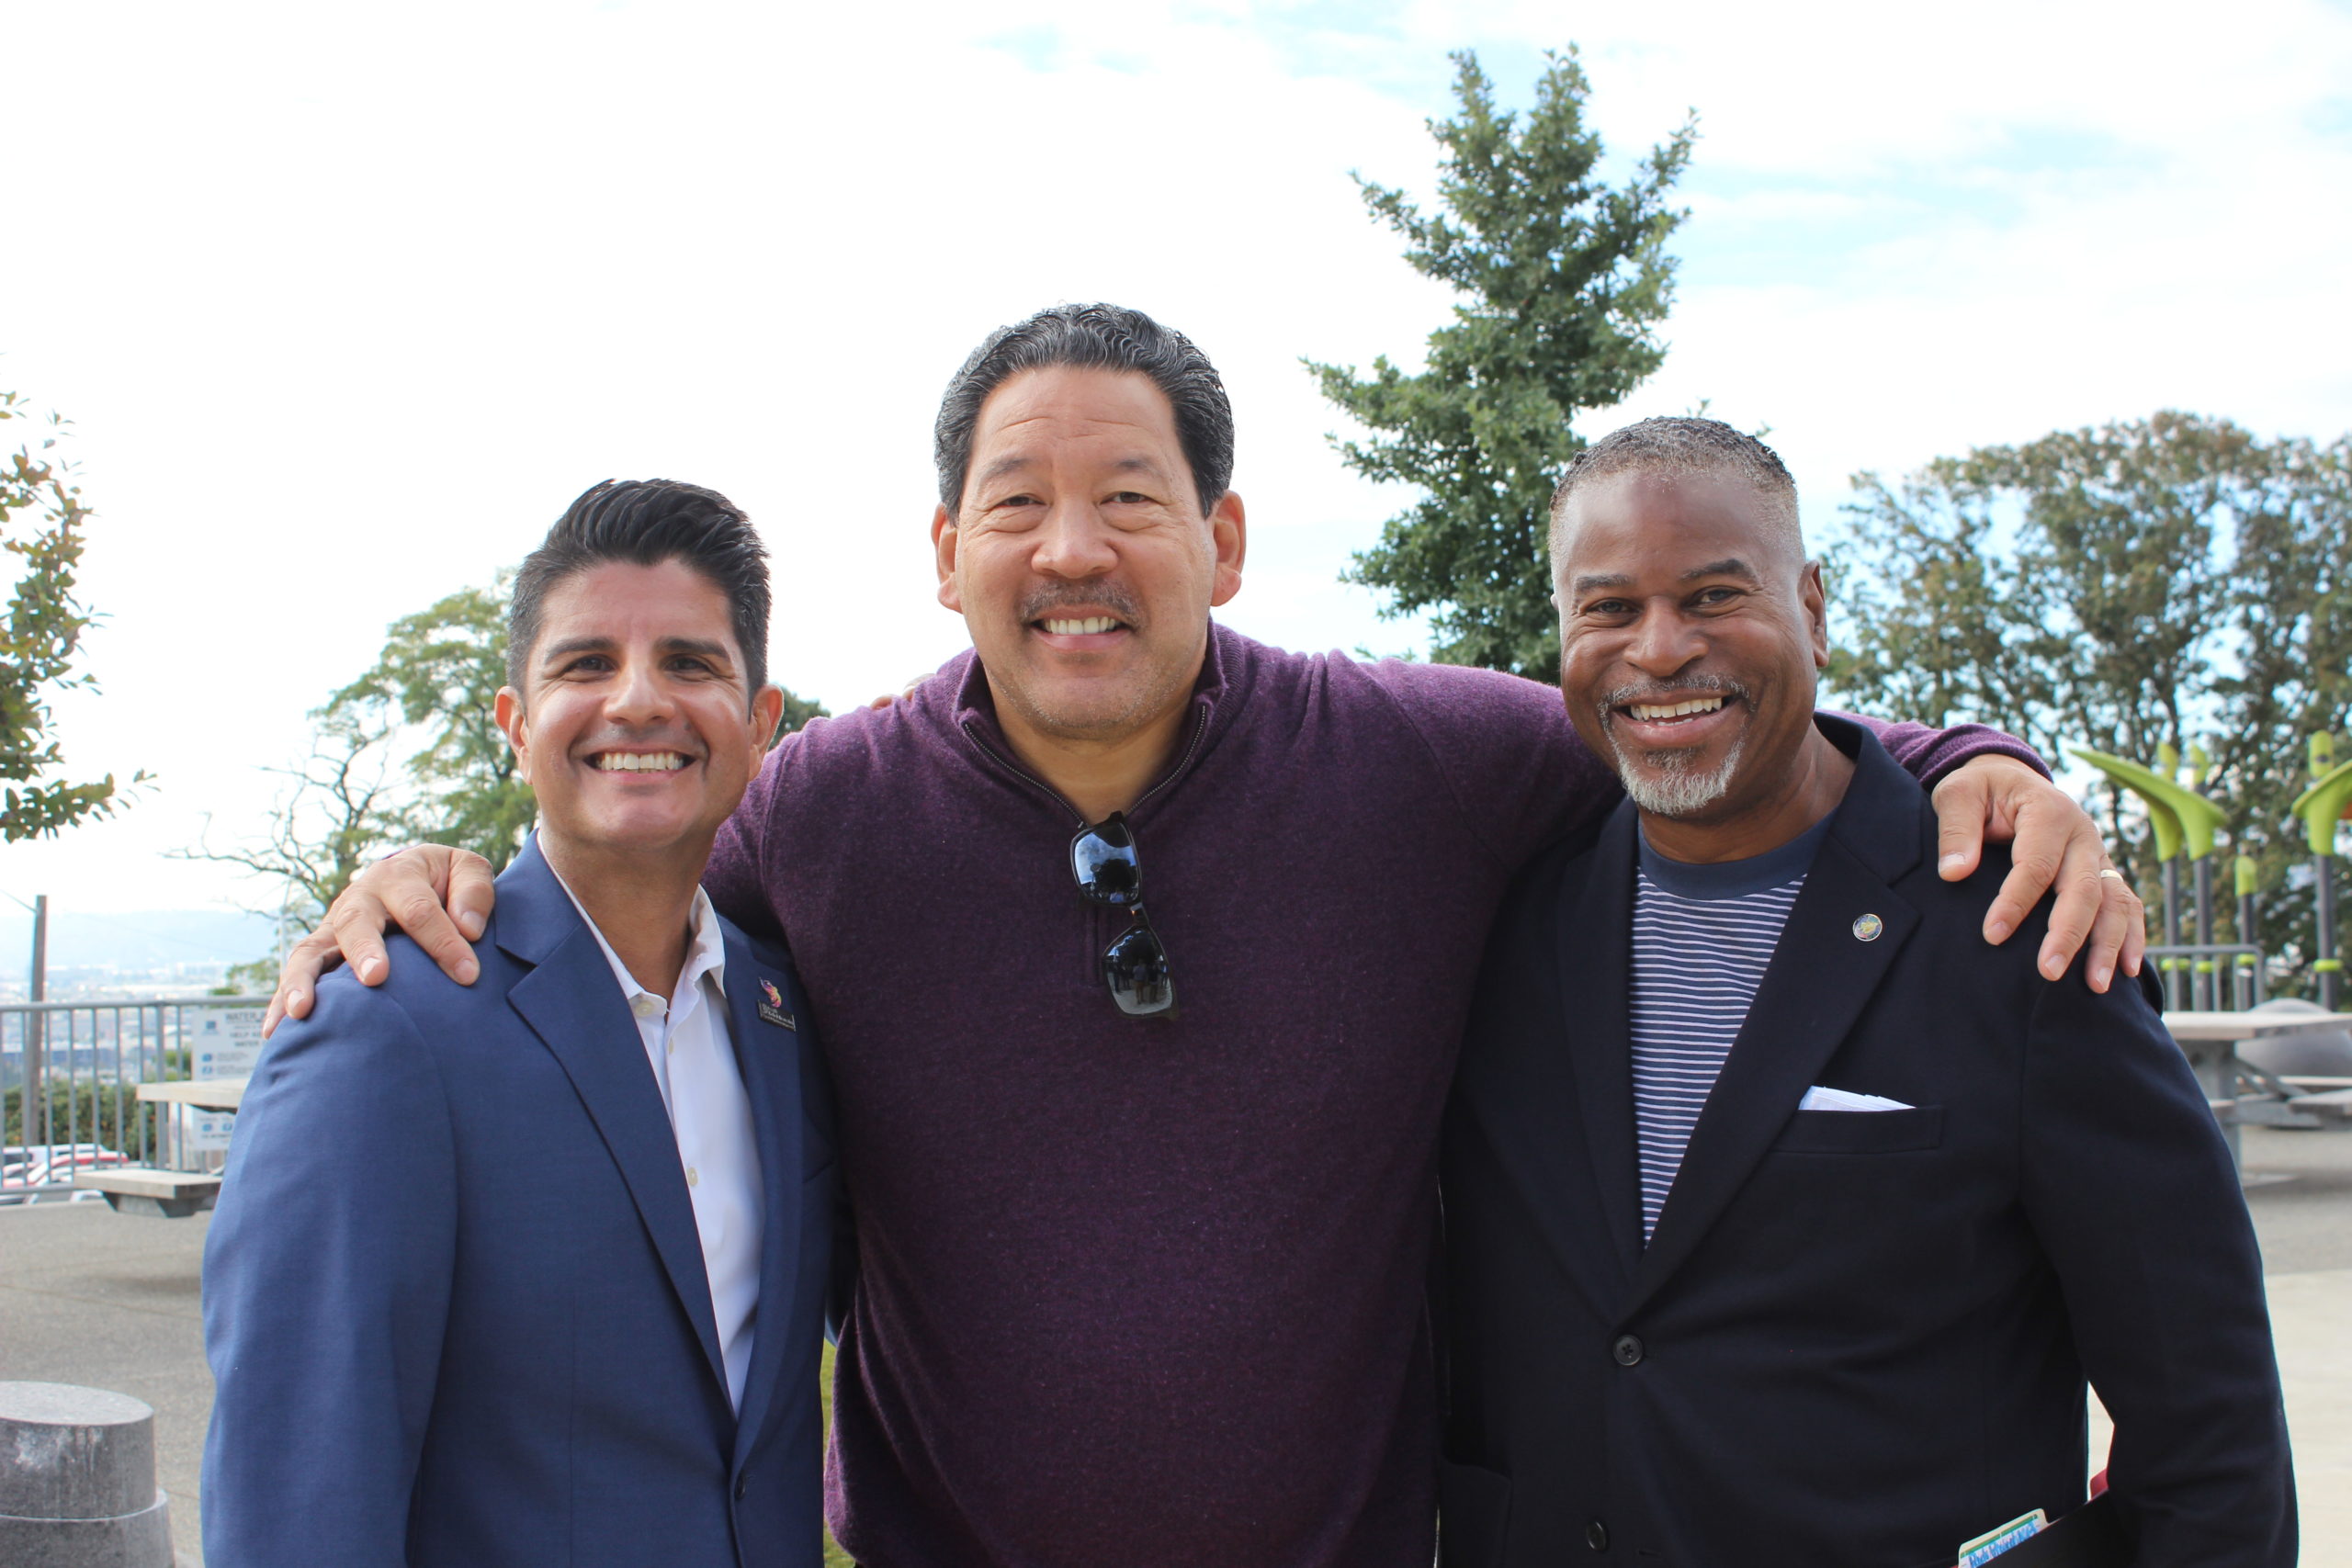 AP Diaz (left), Mayor Harrell (center) and Christopher Williams (right) pose for a photo.